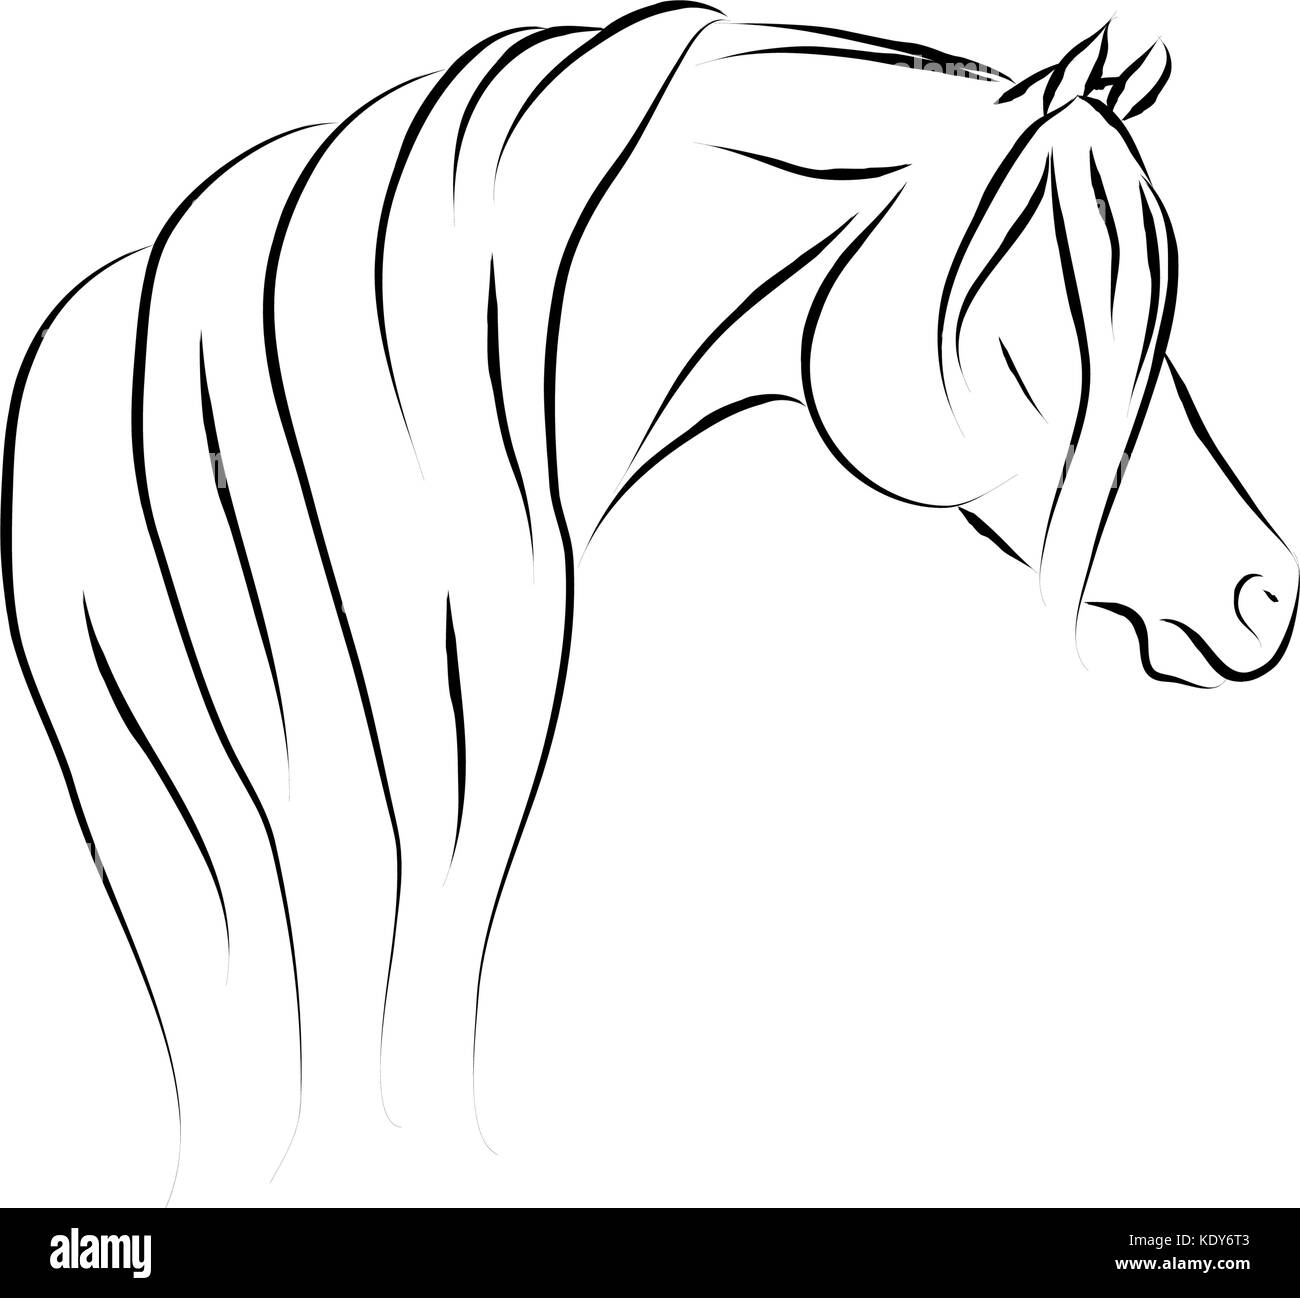 Handdrawn Of Arabian Horse Sketch With Pen In Vector Format. EPS 10 Royalty  Free SVG, Cliparts, Vectors, And Stock Illustration. Image 182878736.